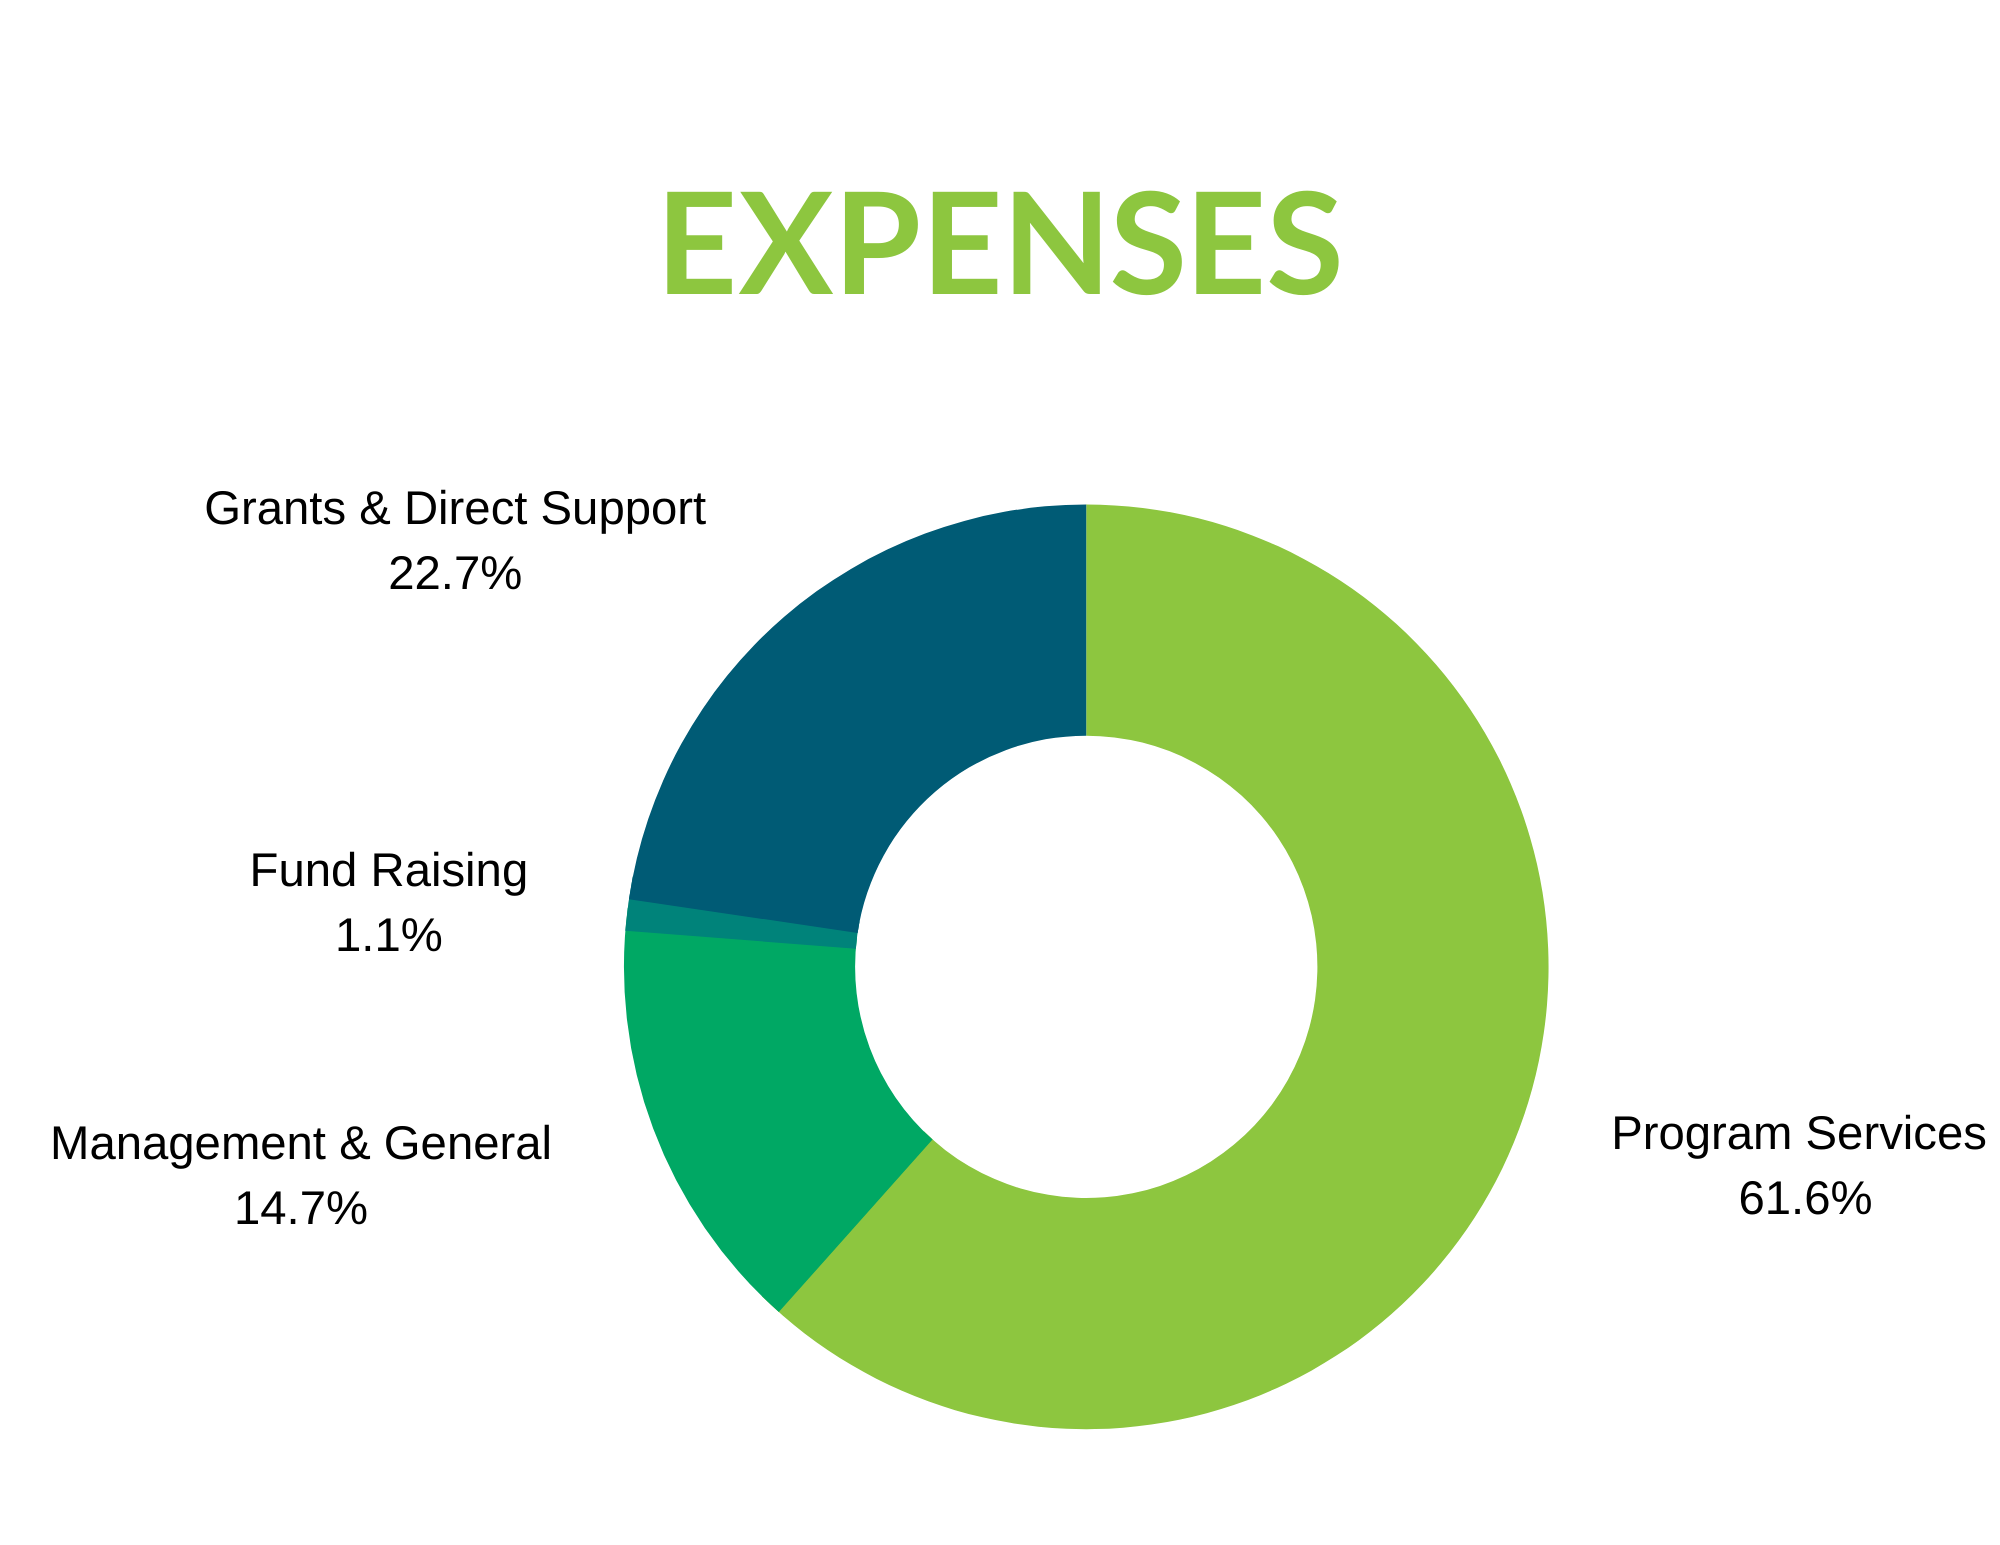 Expenses: Grants and Direct Sport 22.7%. Fund Raising 1.1%. Management and General 14.7%. Program Services 616%